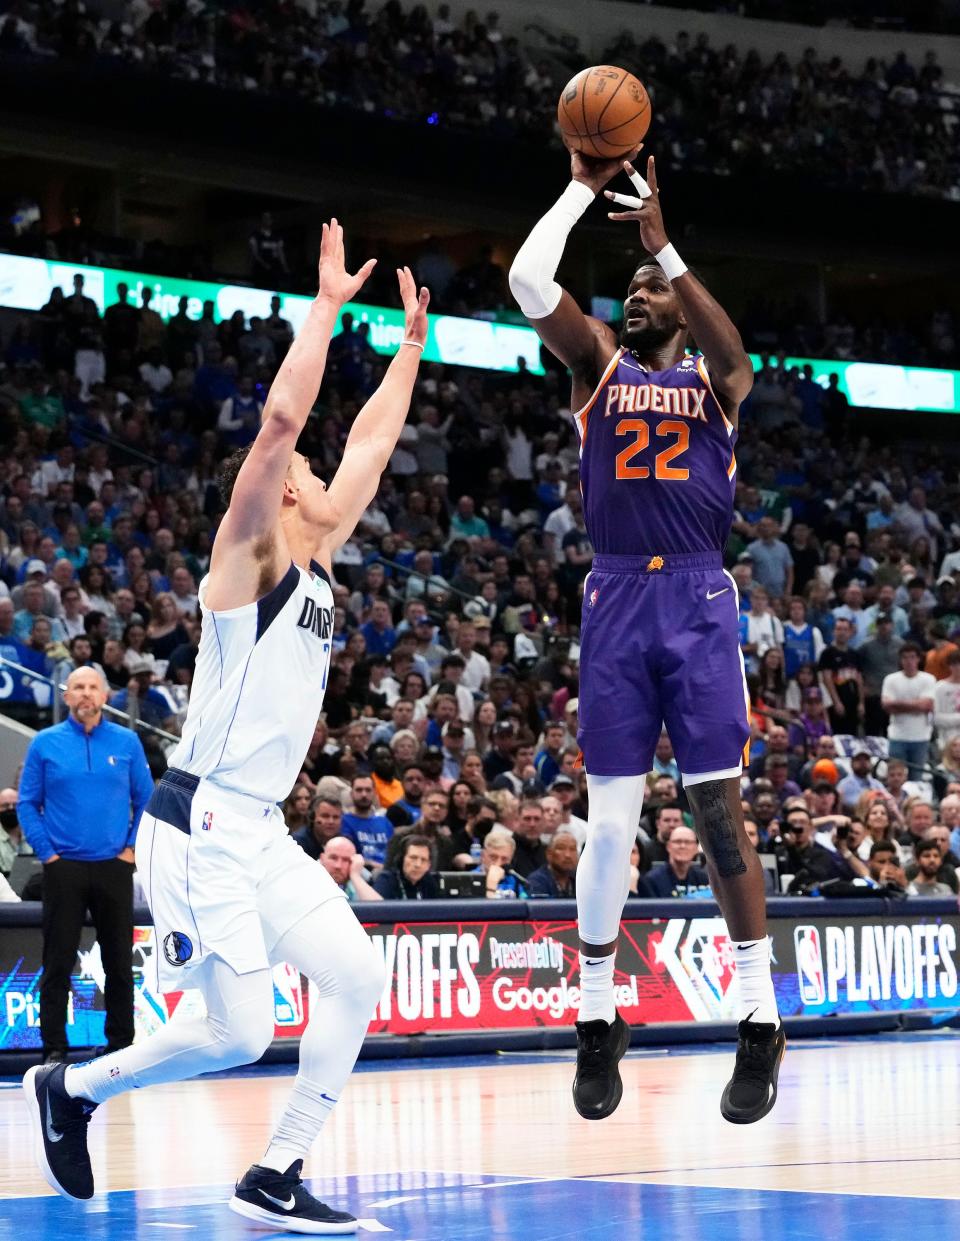 May 6, 2022; Dallas, Texas, USA; Phoenix Suns center Deandre Ayton (22) shoots a jumper against Dallas Mavericks center Dwight Powell (7) during game three of the second round for the 2022 NBA playoffs at American Airlines Center.